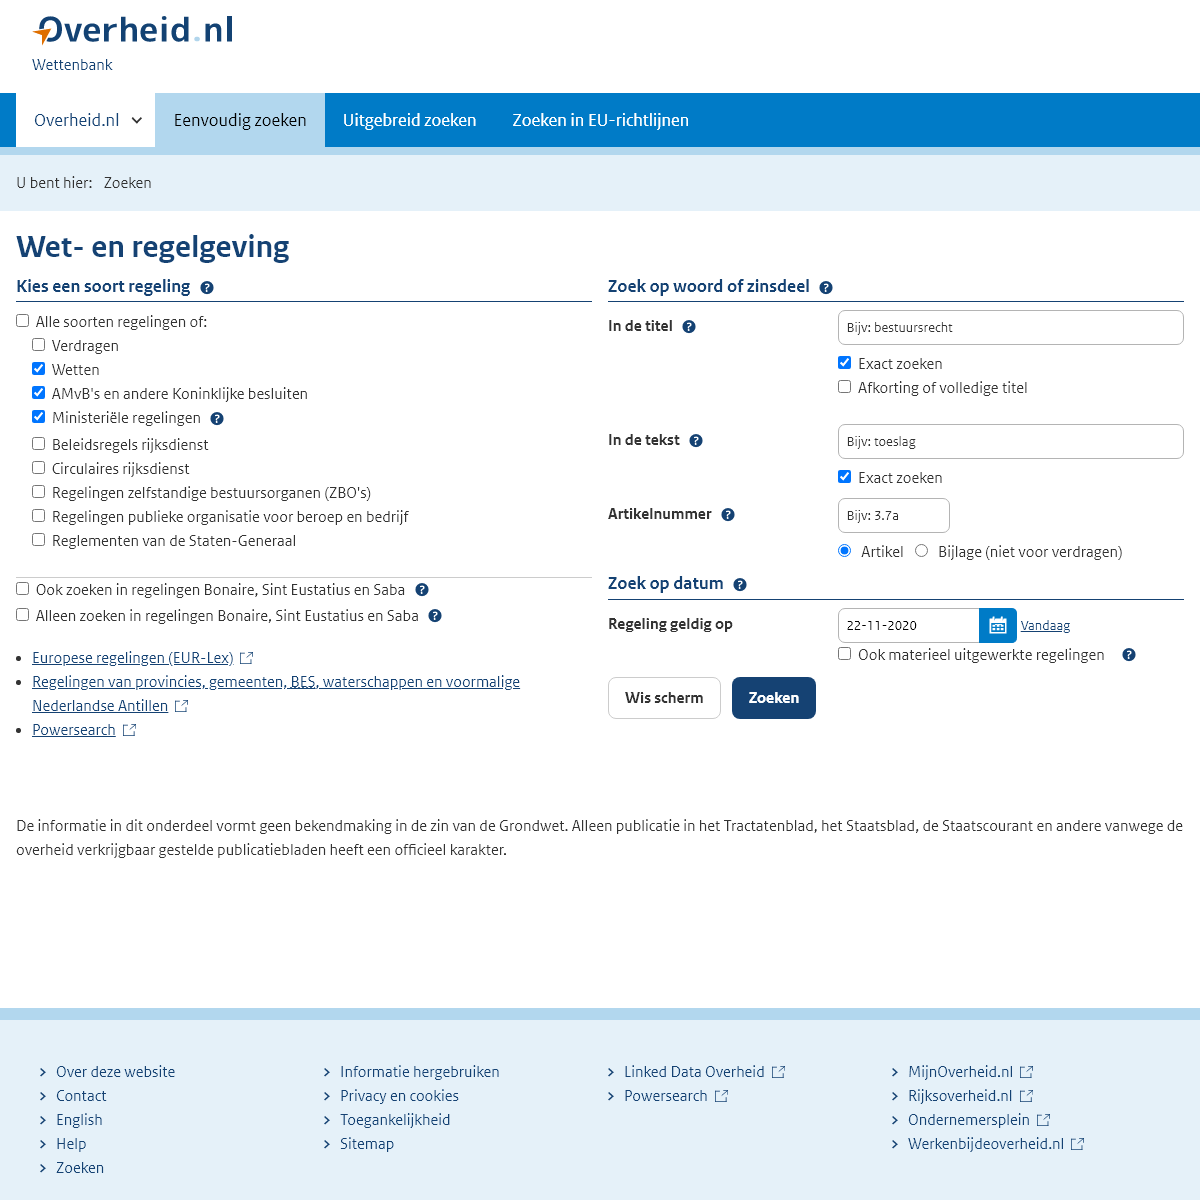 A complete backup of wetten.nl